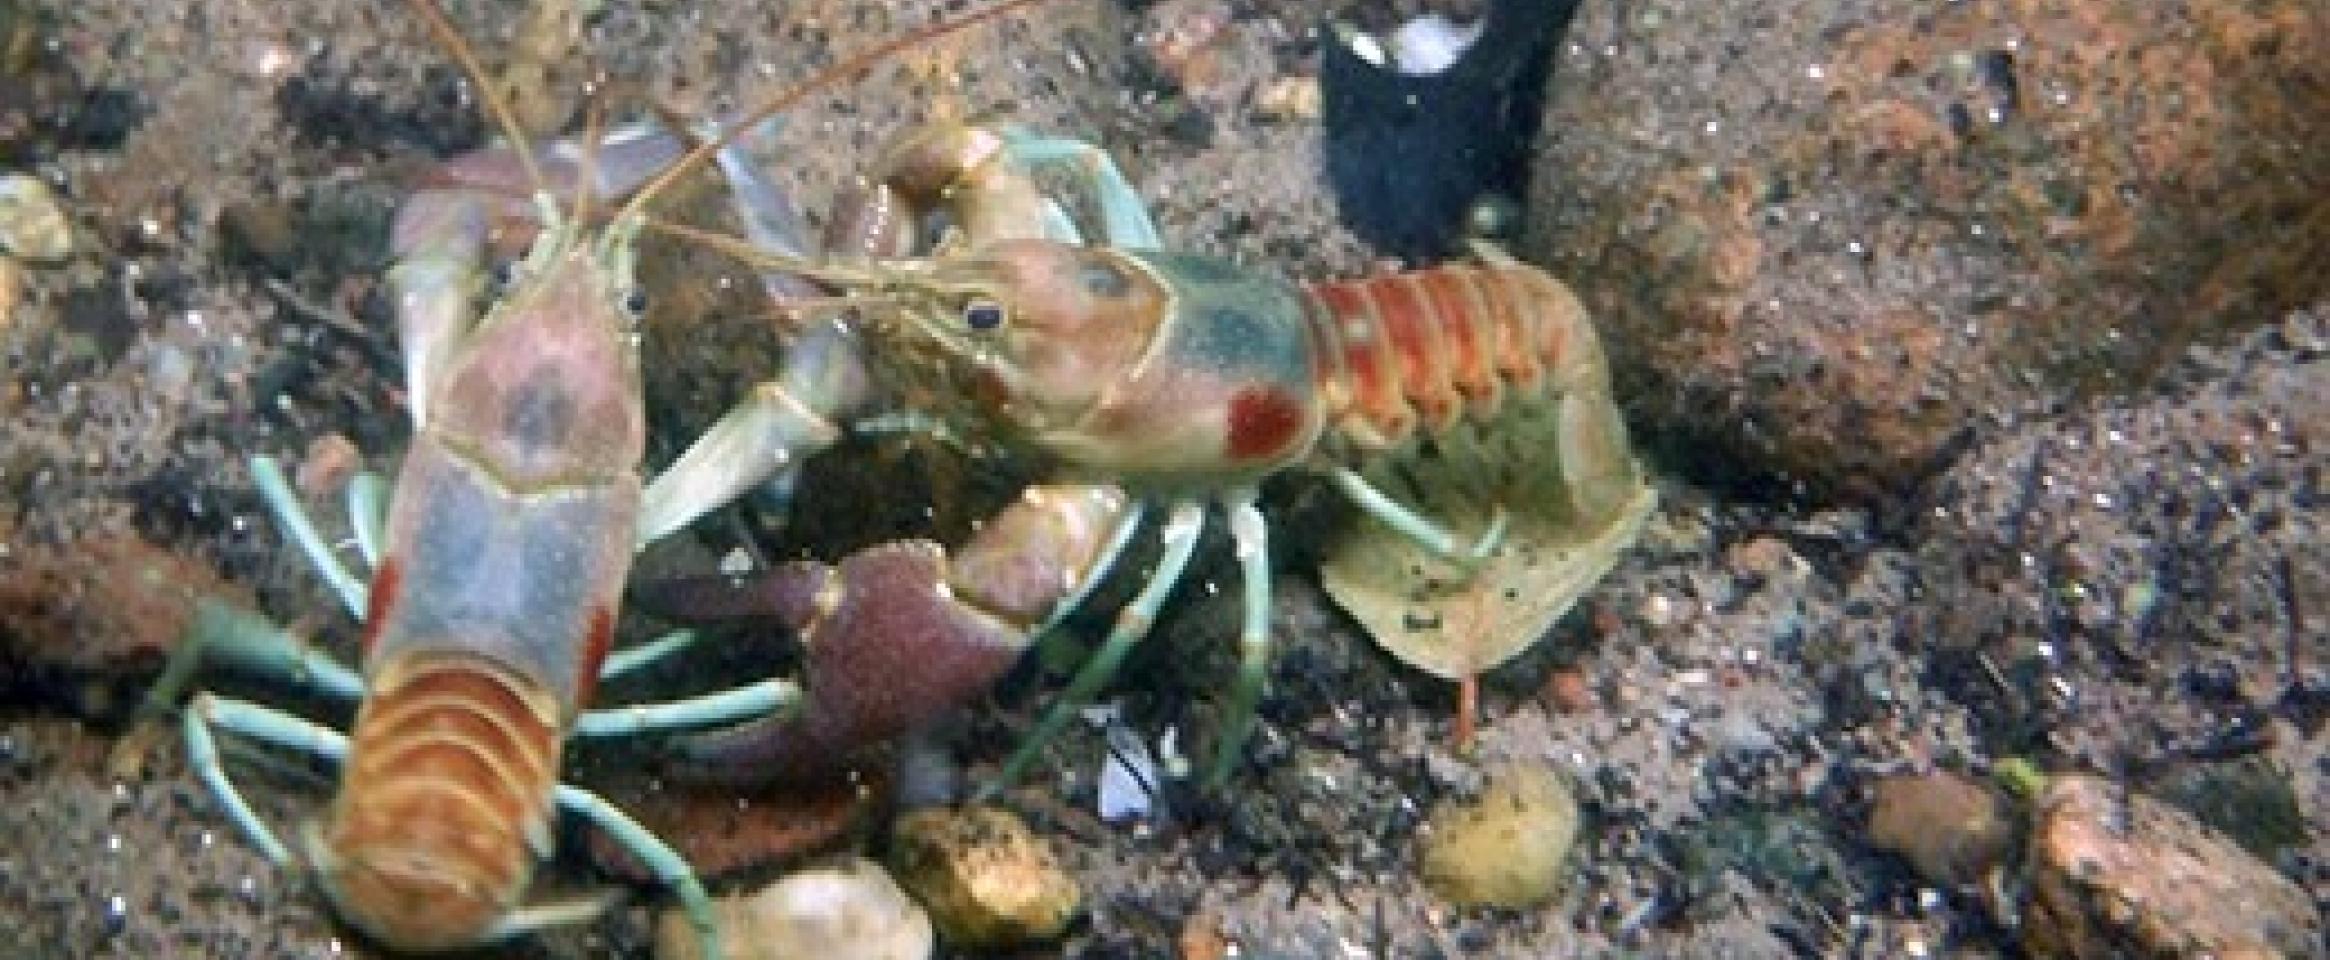 Invasive crayfish are dying in the Midwest. Could a fungus be the